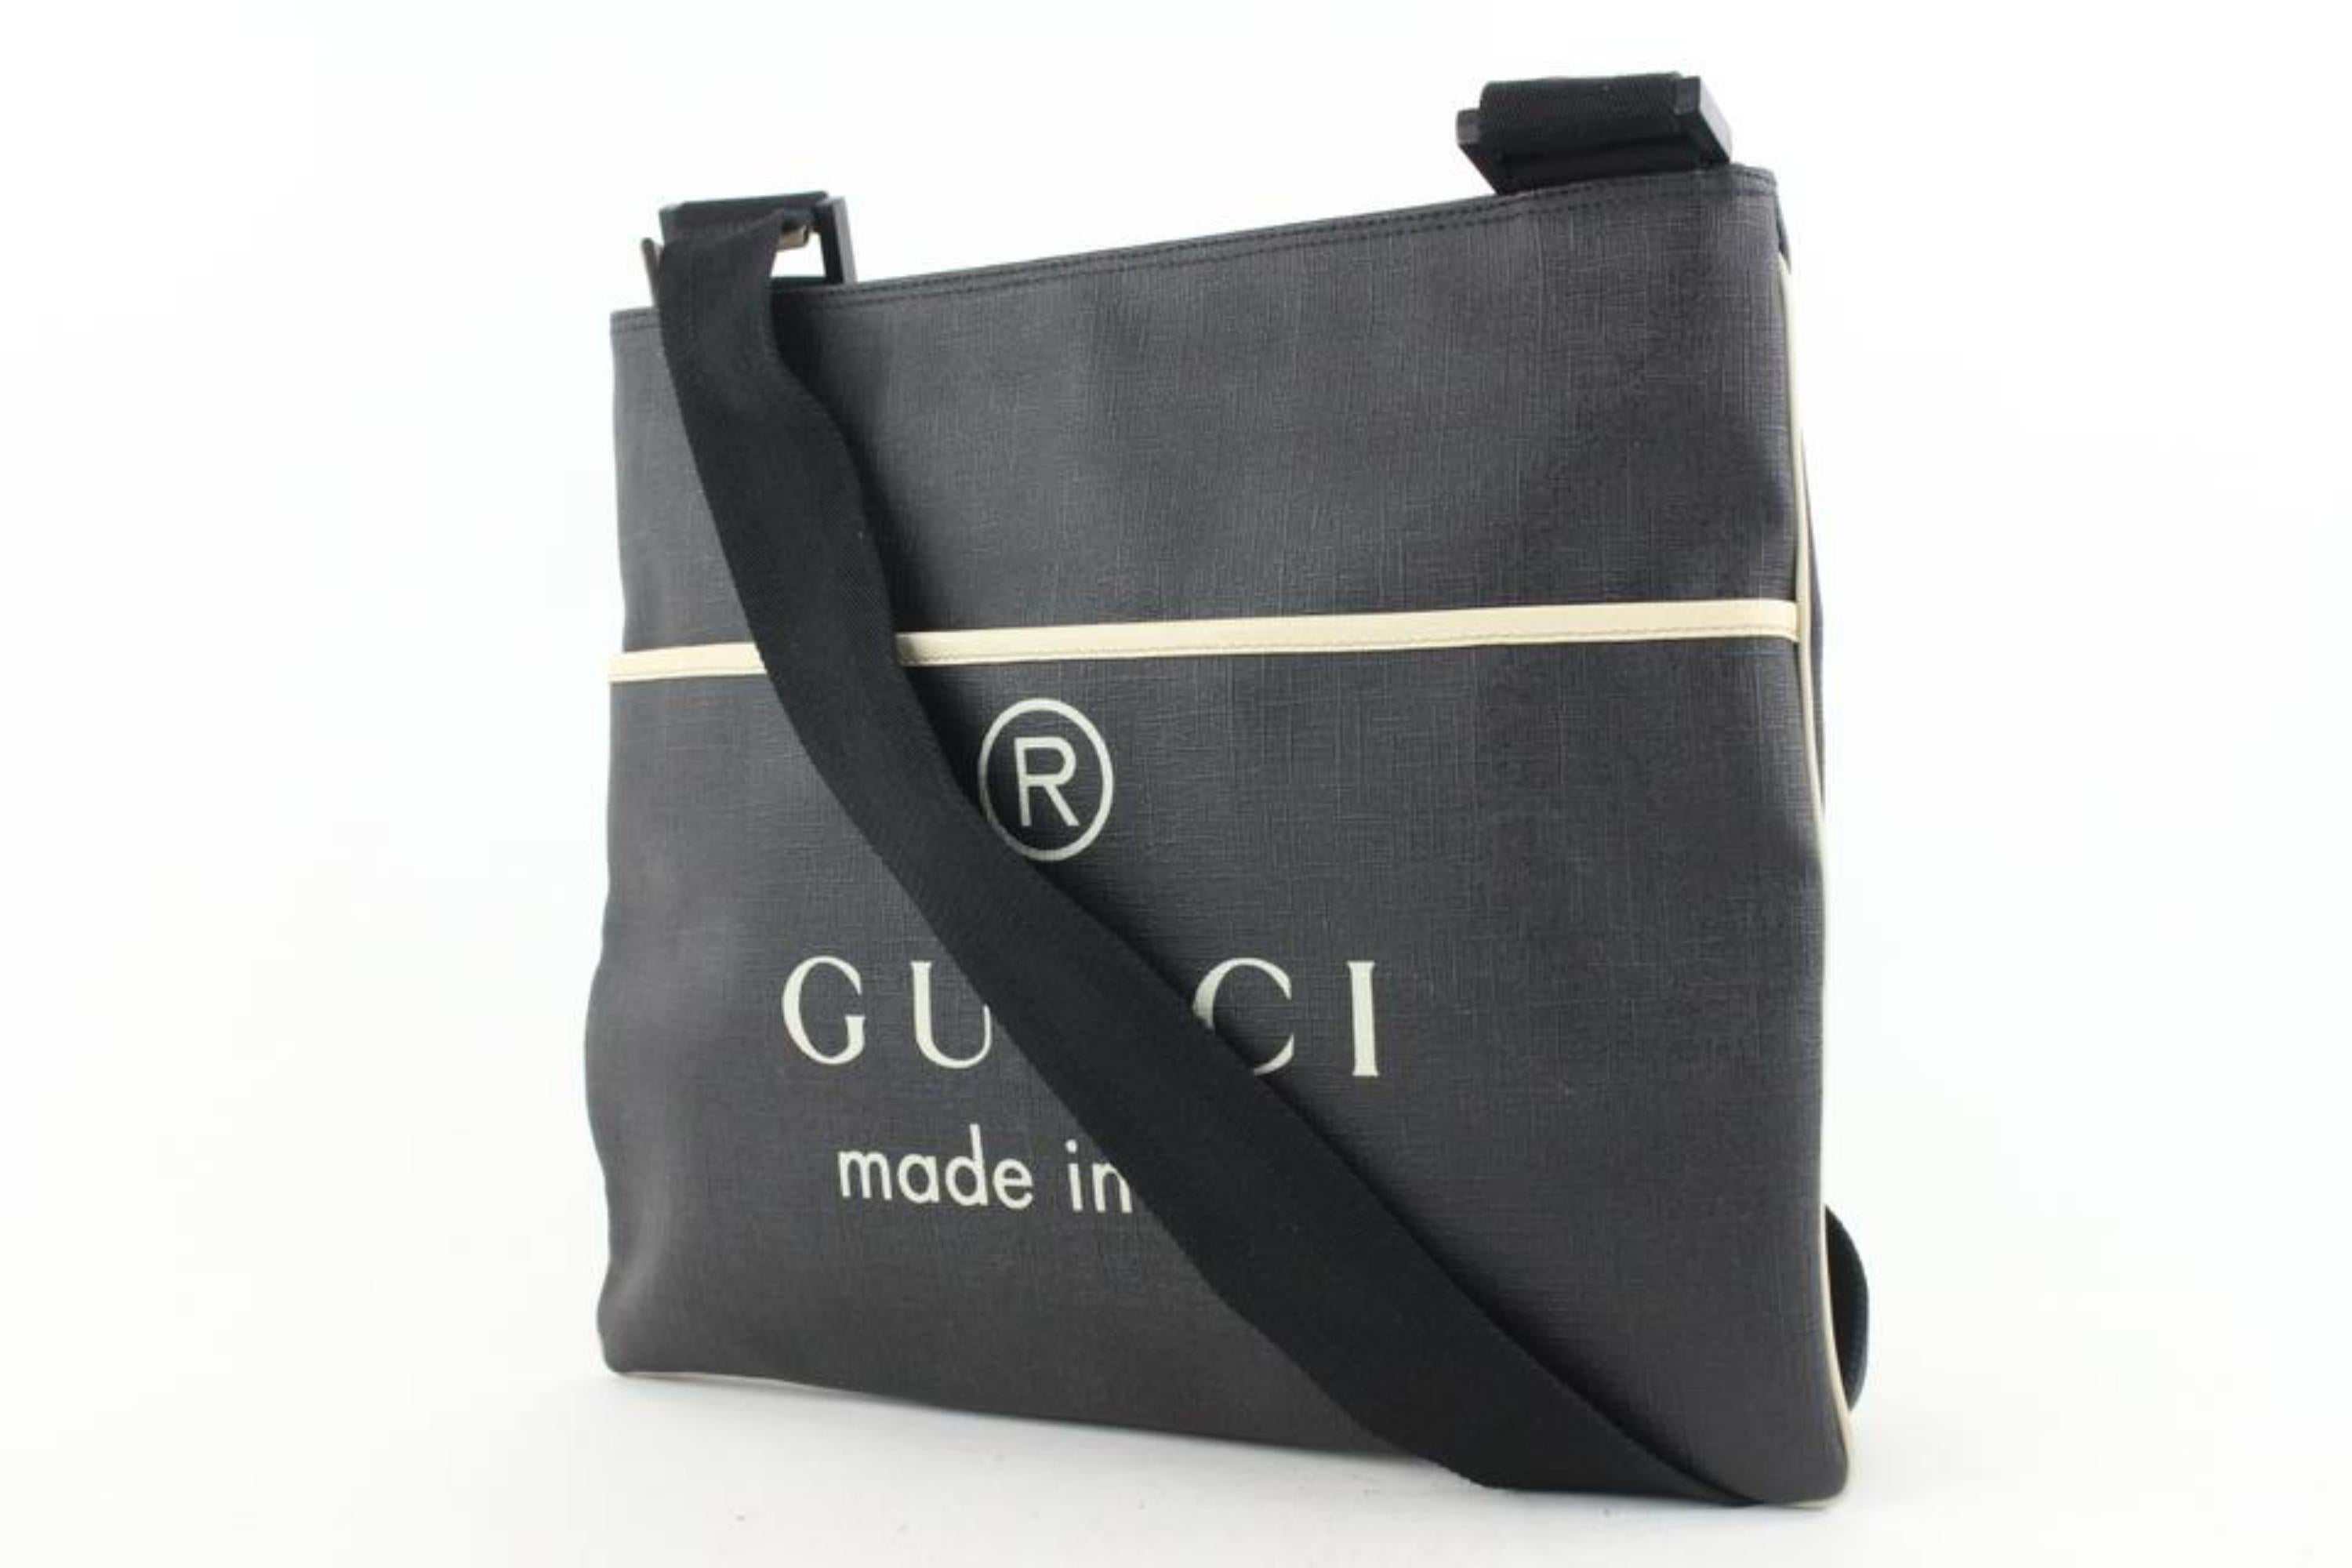 Gucci Black Supreme Trademark Logo Messenger Crossbody Bag 1GG1227
Date Code/Serial Number: 162904 493075
Made In: Italy
Measurements: Length:  13.5